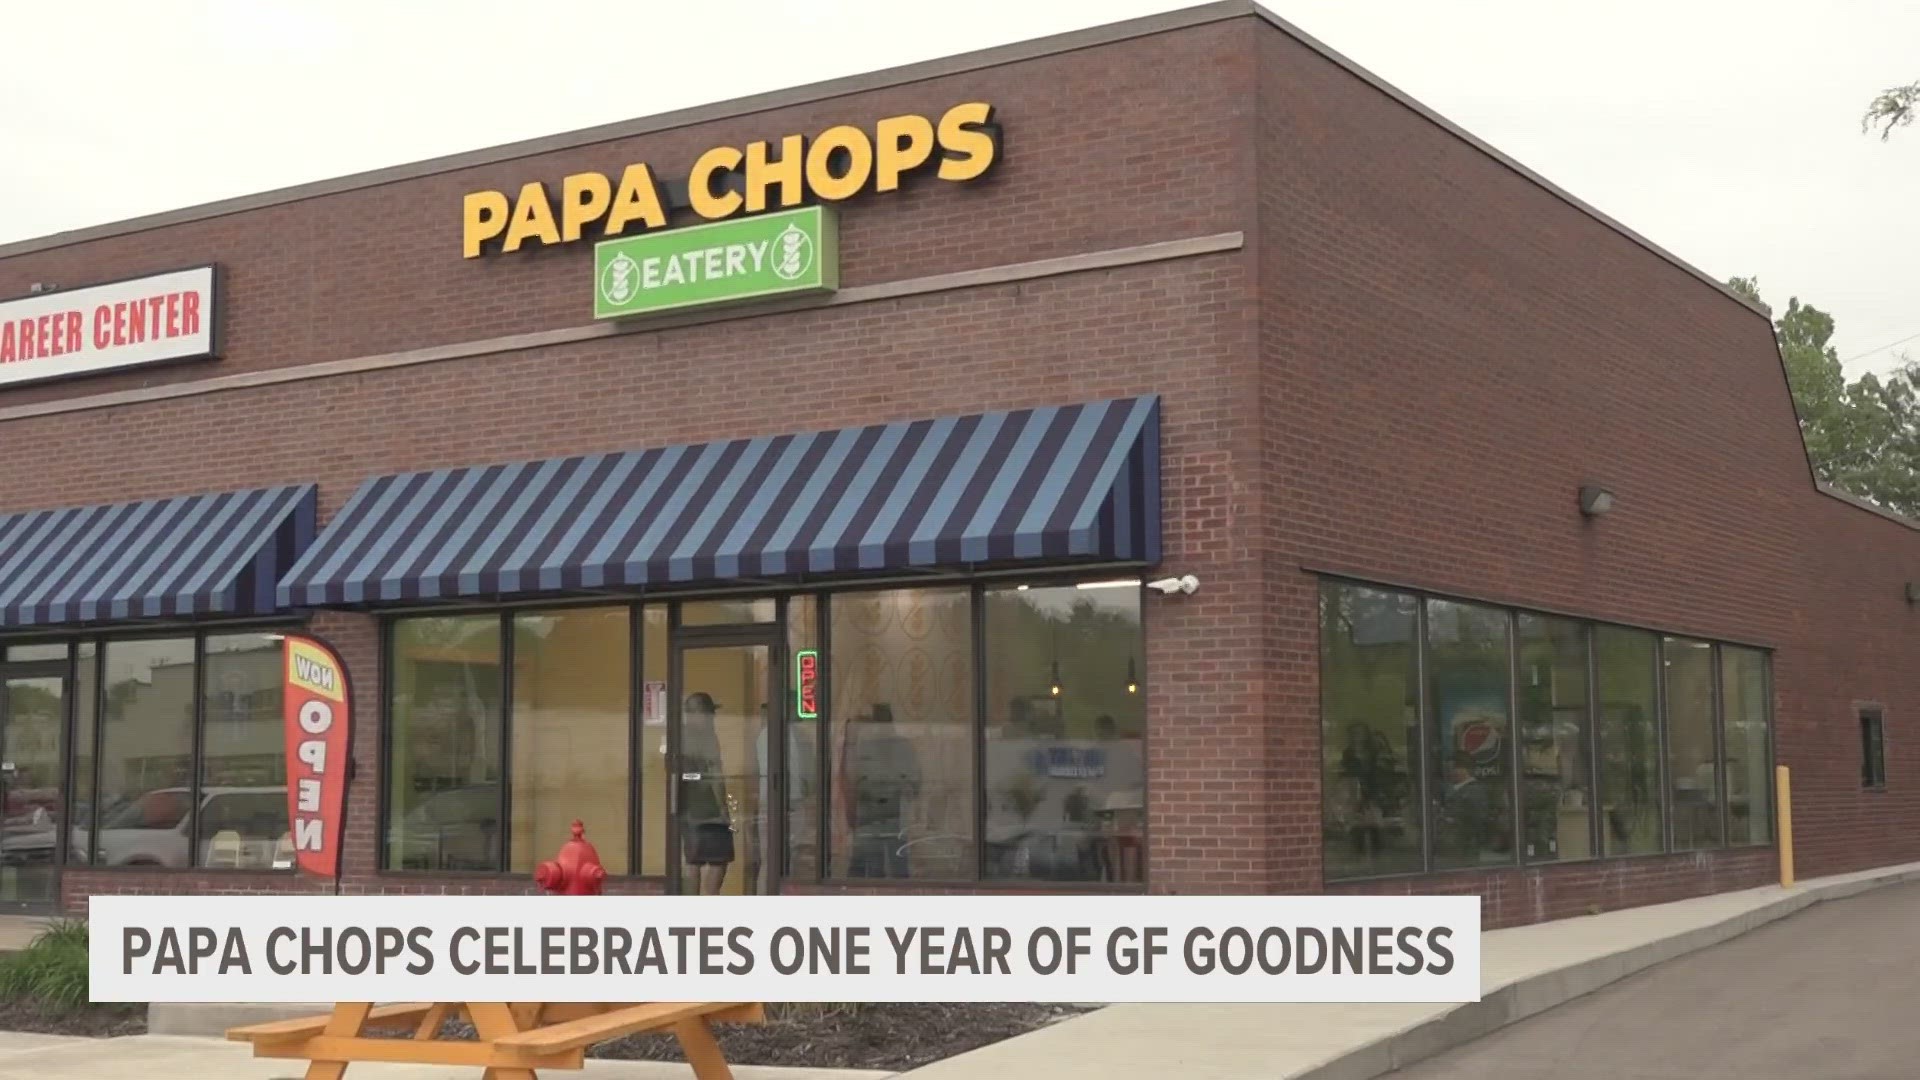 Papa Chops brings customers in by offering a variety of gluten-free comfort food.